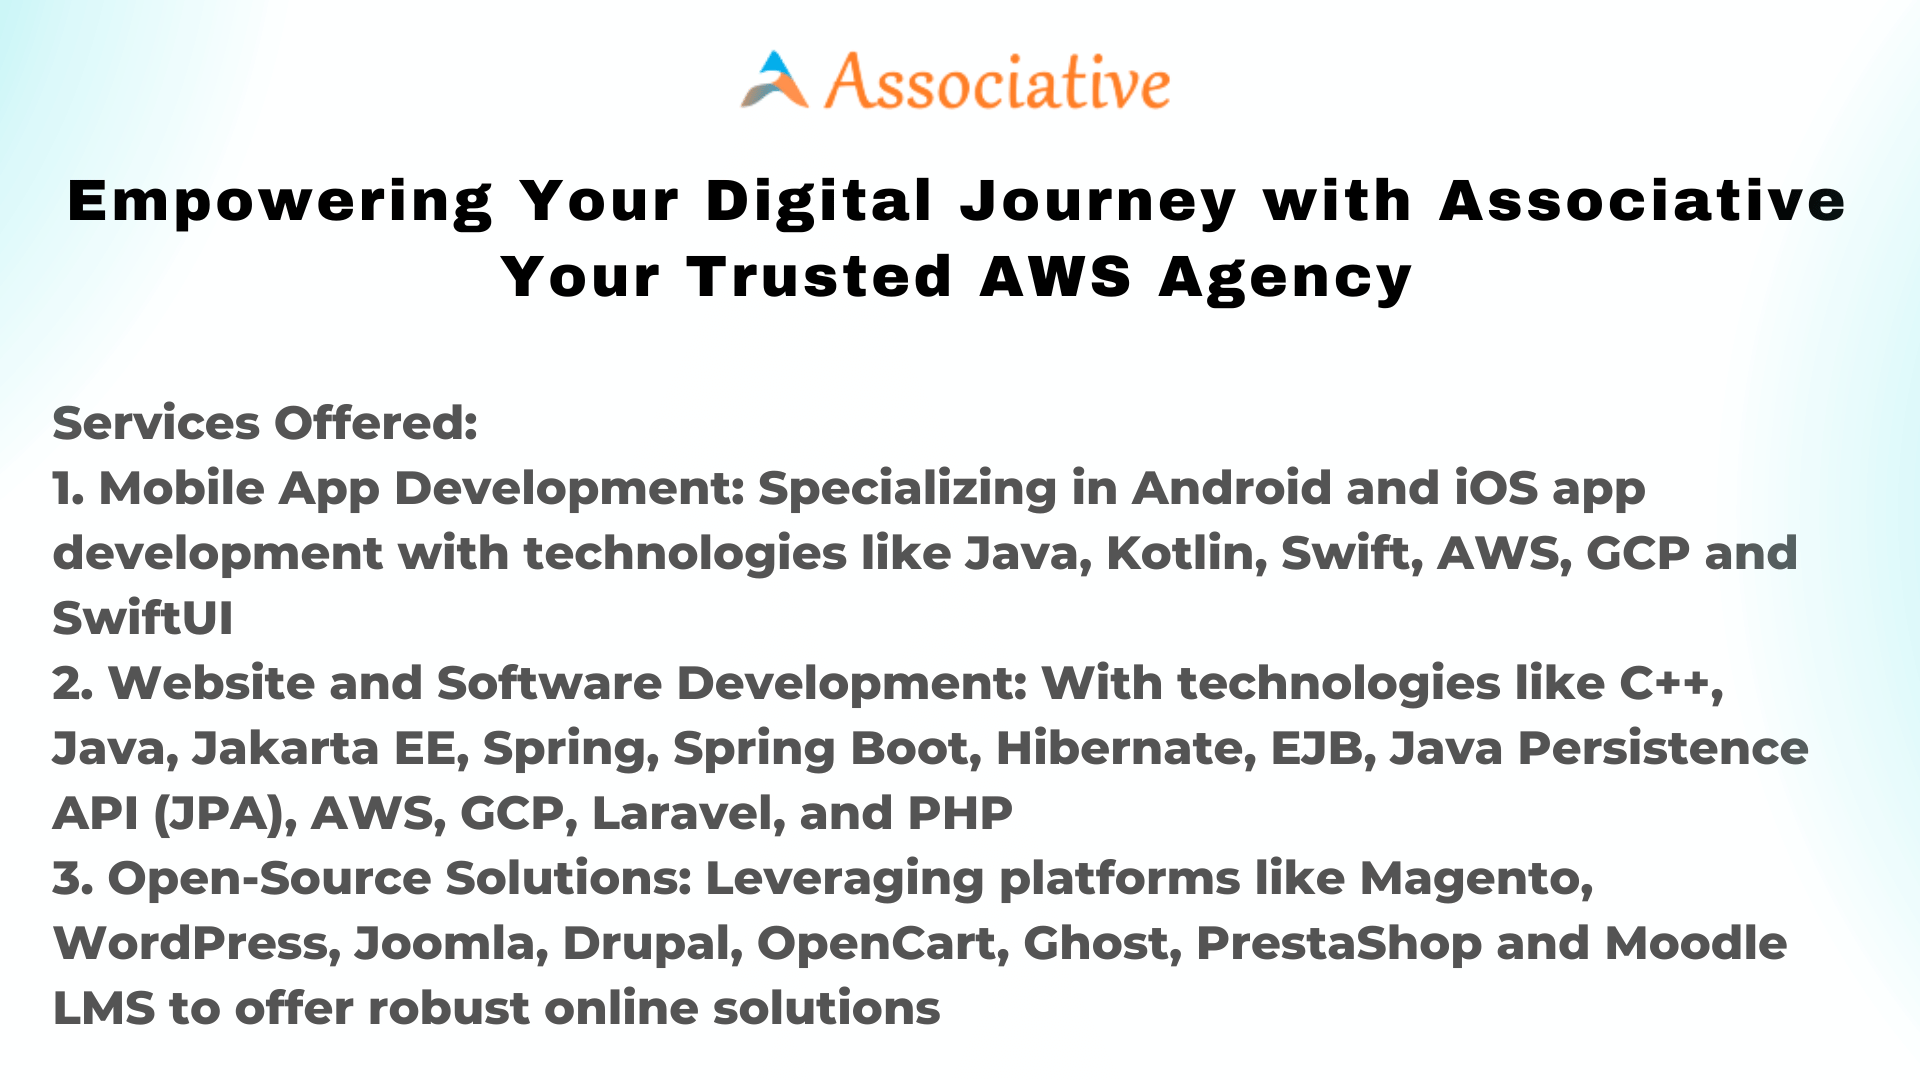 Empowering Your Digital Journey with Associative Your Trusted AWS Agency